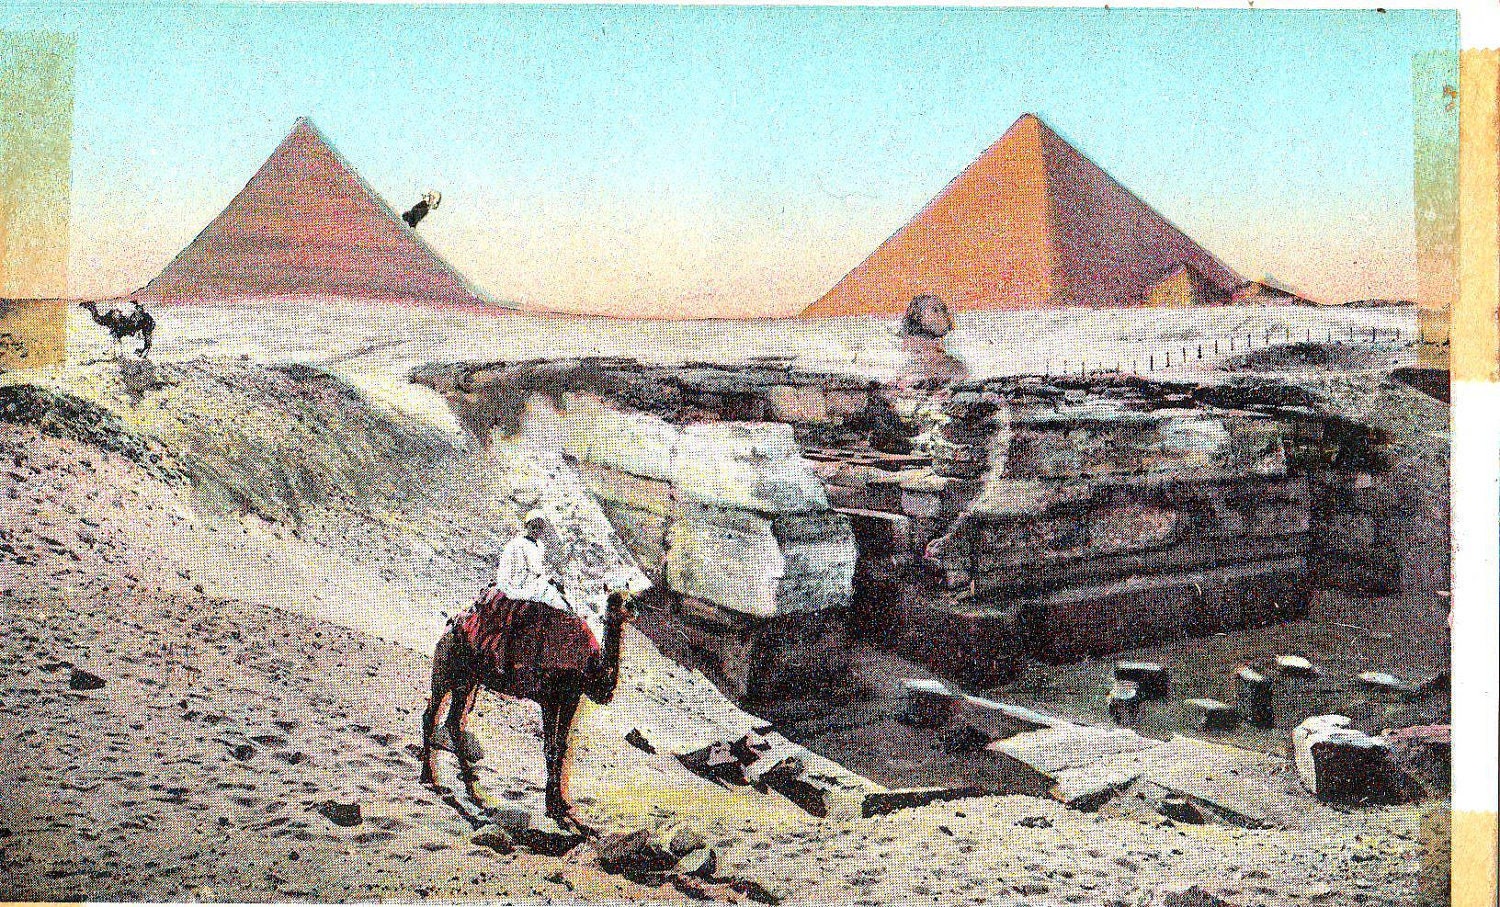 Antique Postcard - Cairo - Temple of Mena Sphinx and Pyramids - thevintagemode